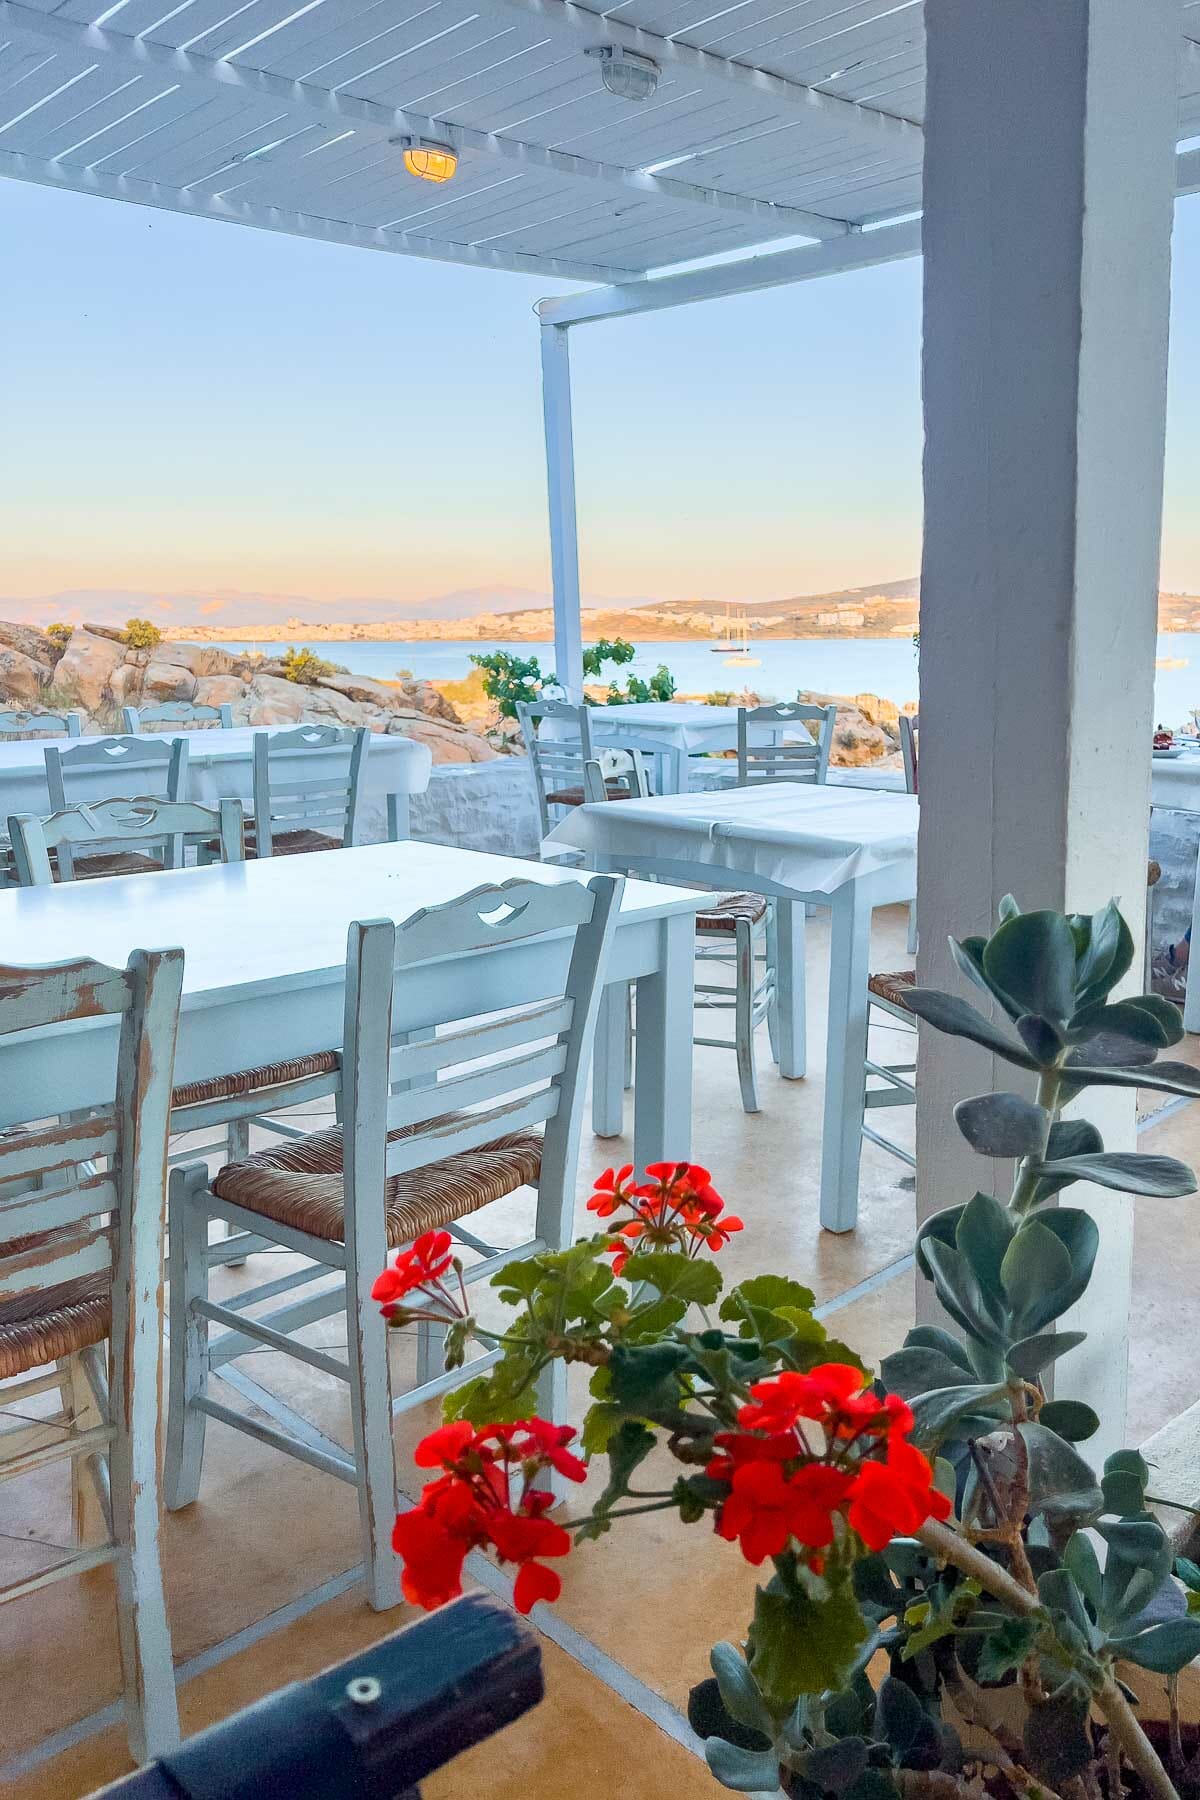 Lovely outdoor seating area at Taverna Kolibithres in Paros